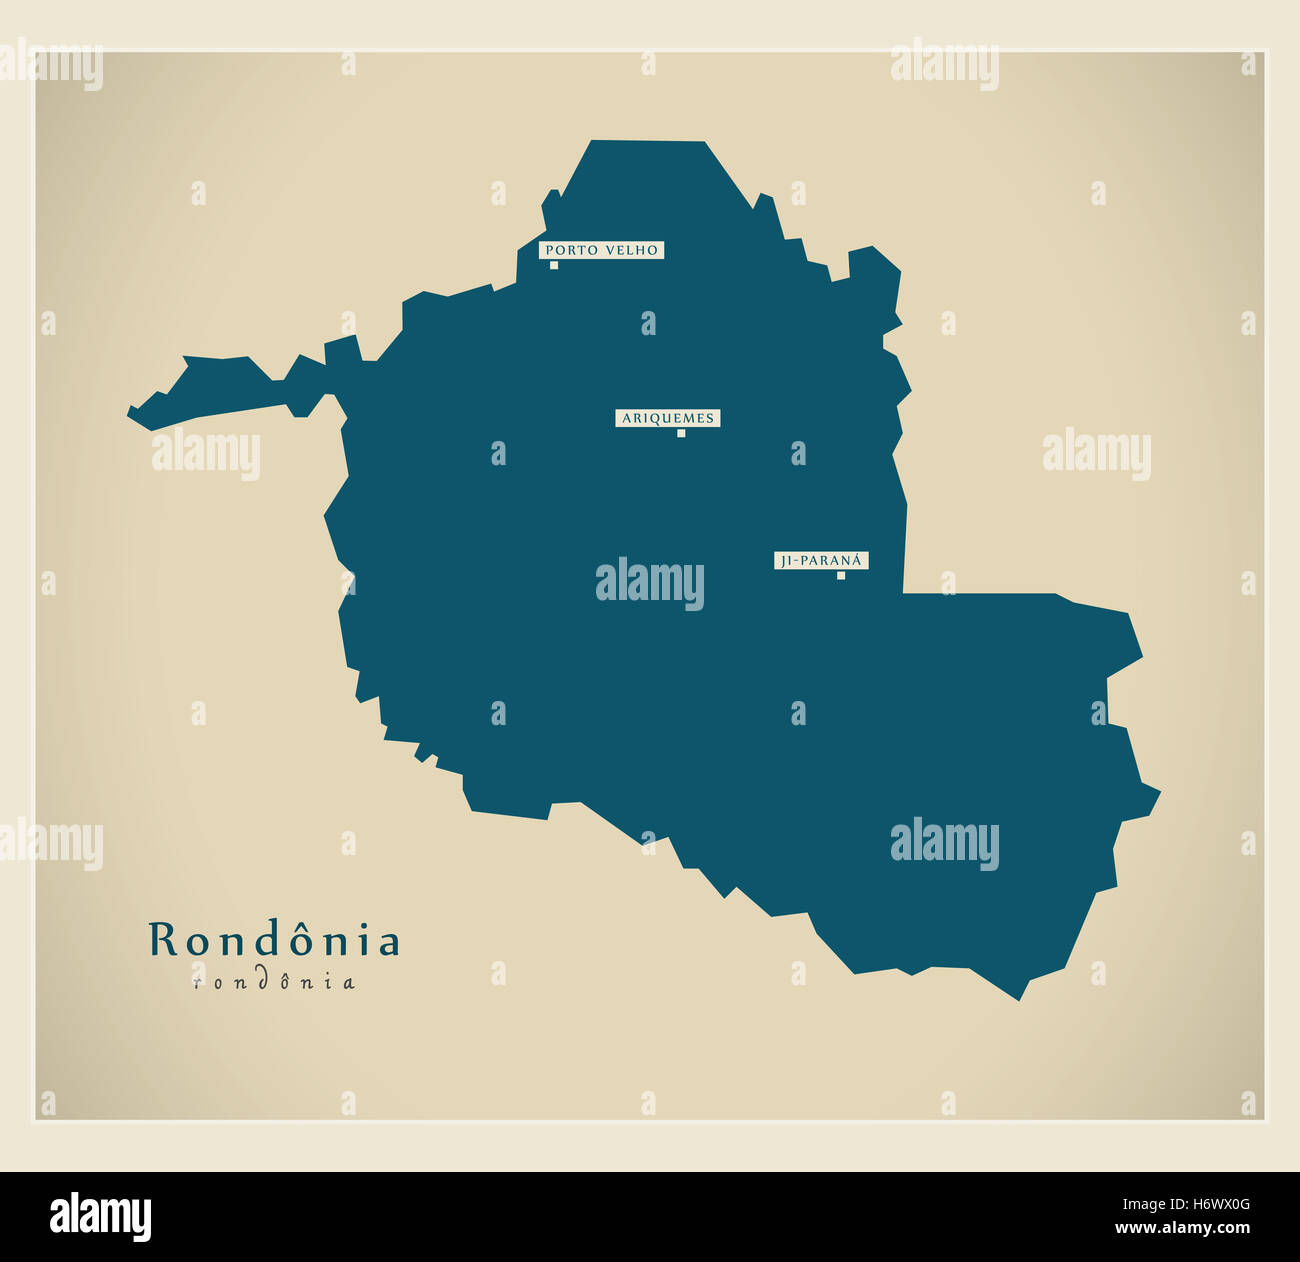 File:Flag map of Rondonia.png - Wikimedia Commons